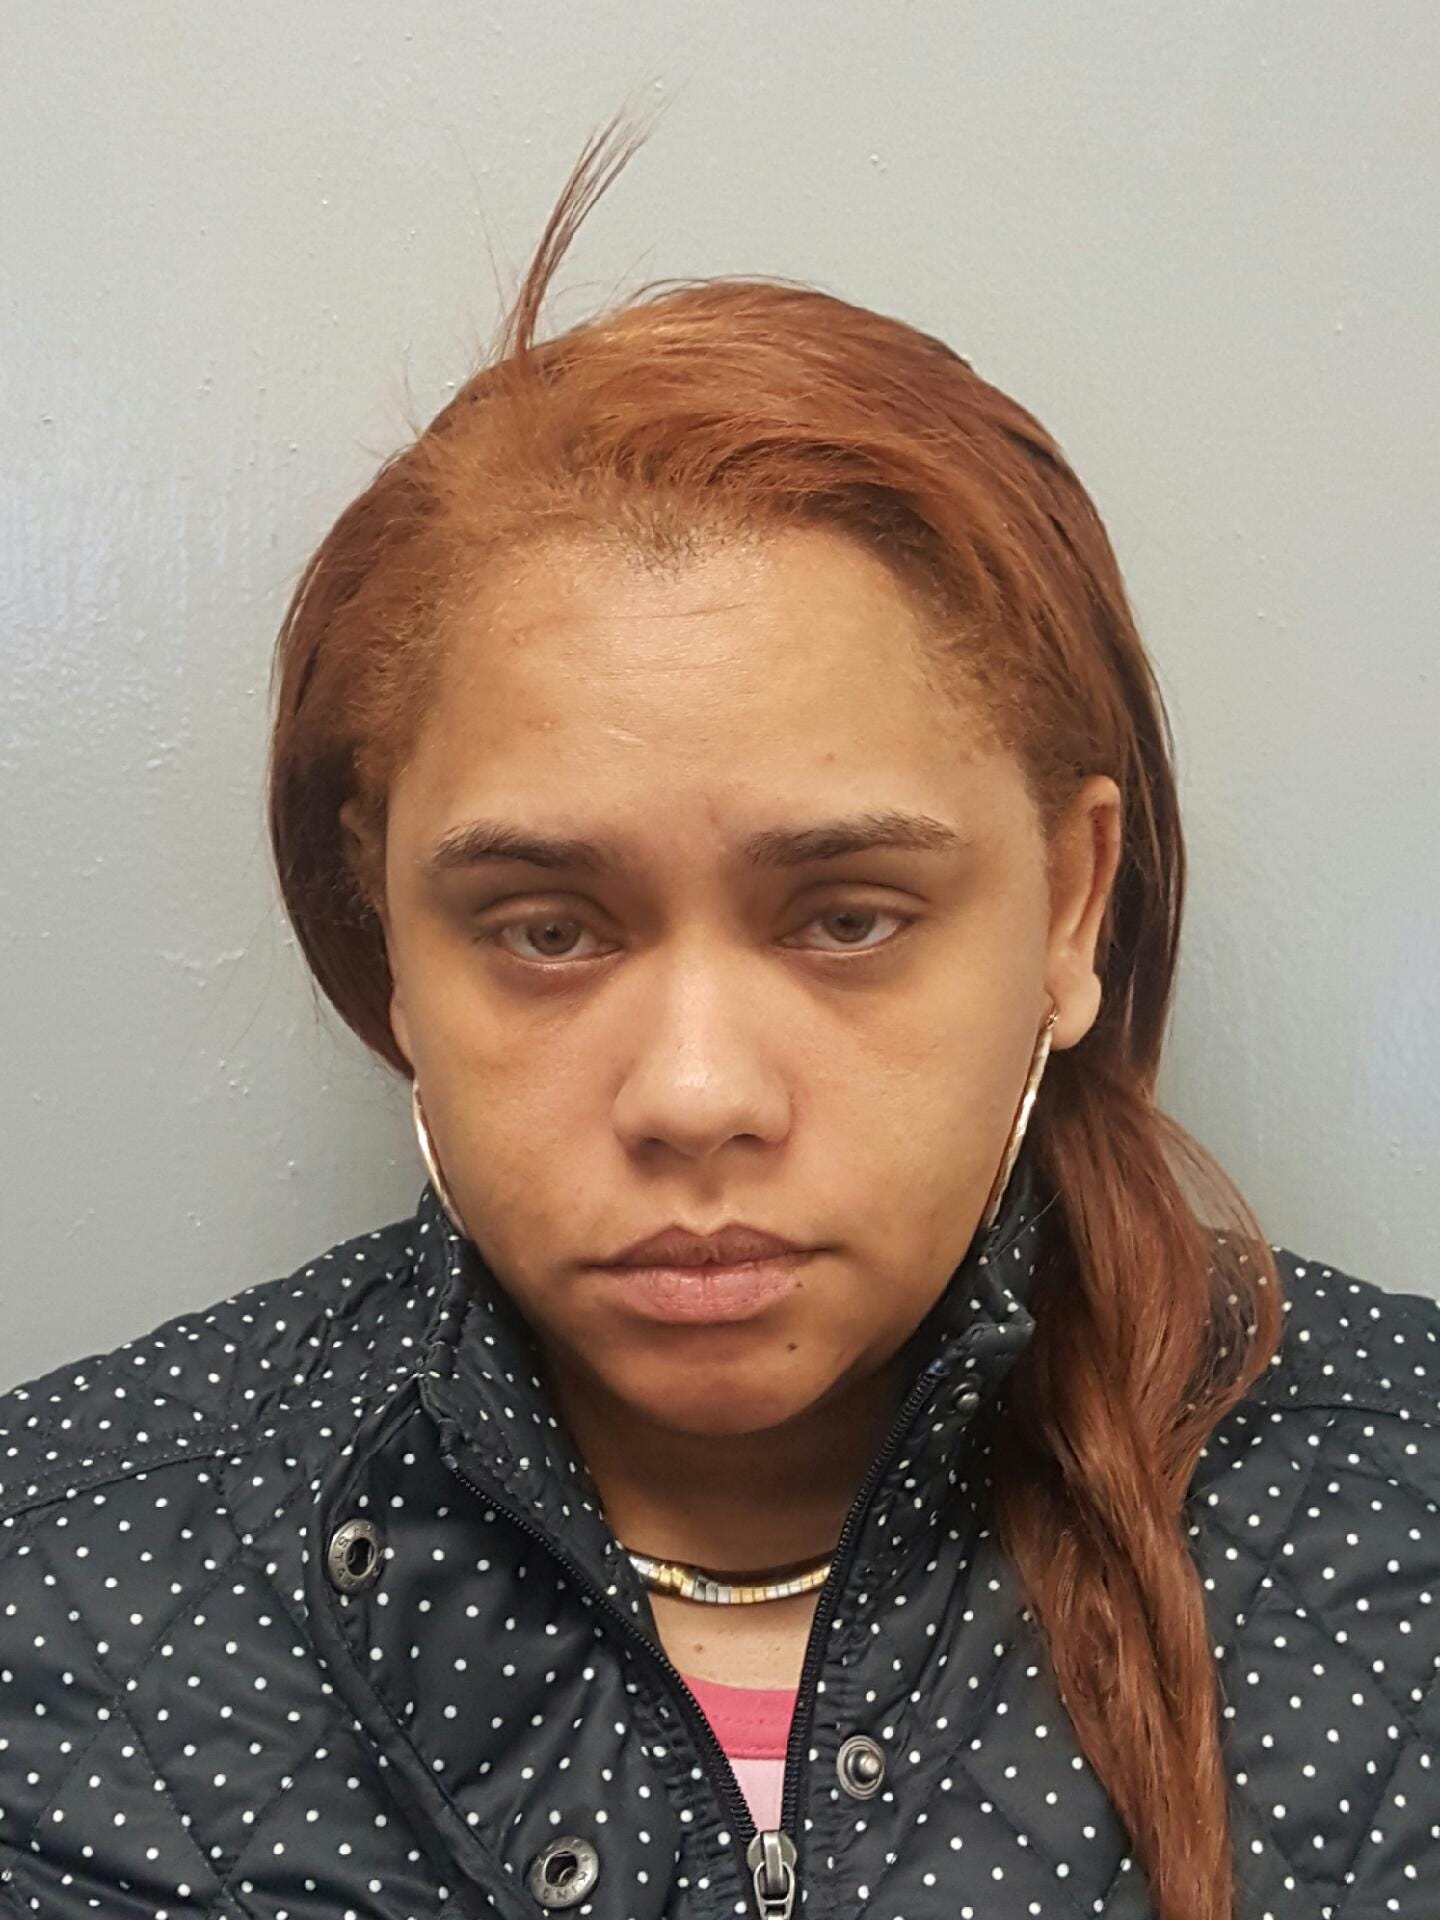 Paterson woman arrested on child porn charges